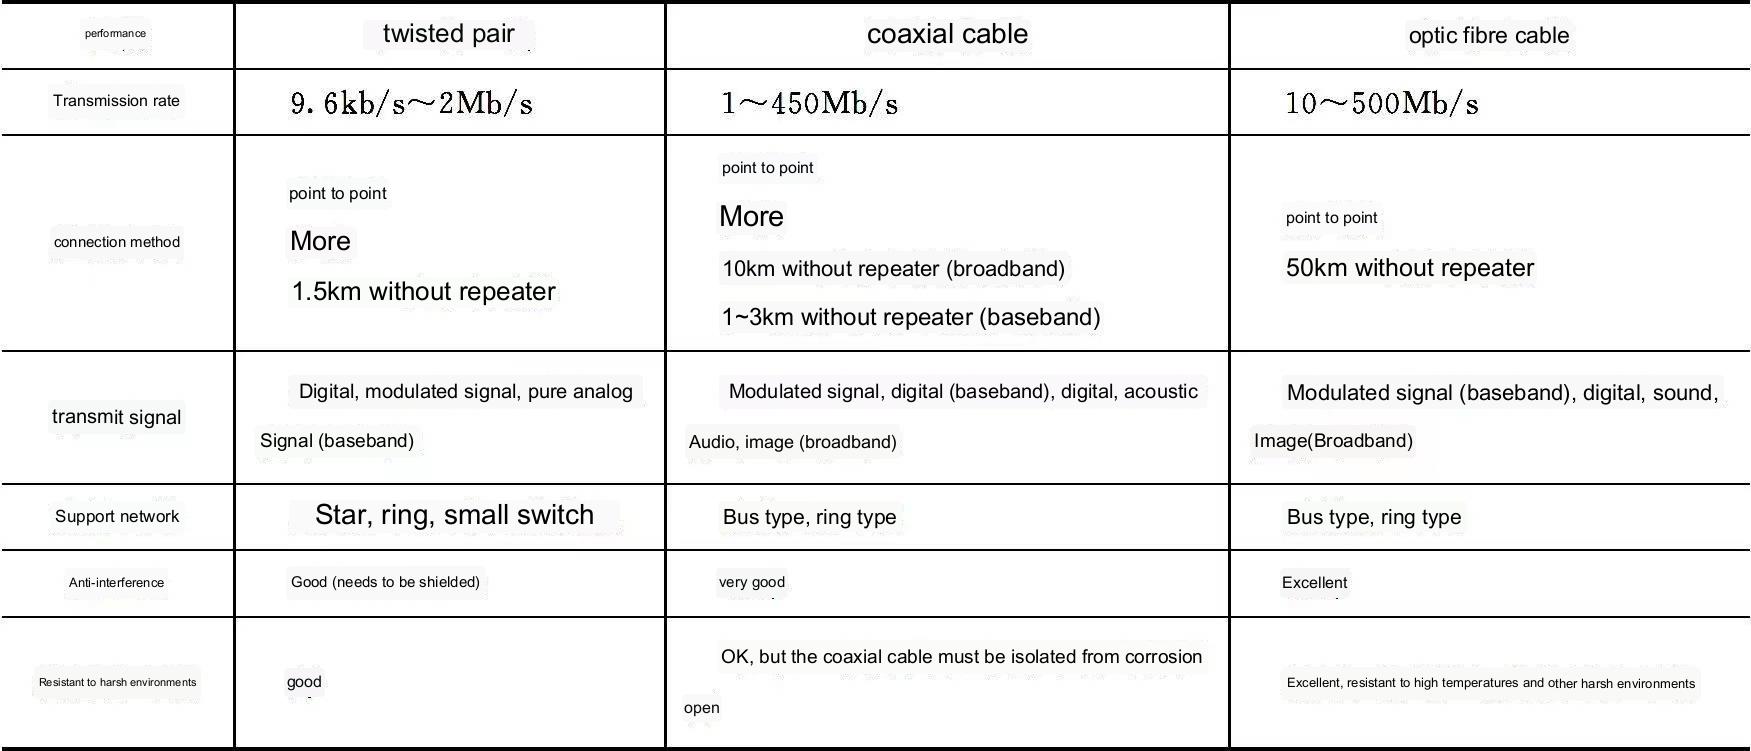 Performance Comparison of Coaxial, Twisted Pair, and Fiber Optic Cables